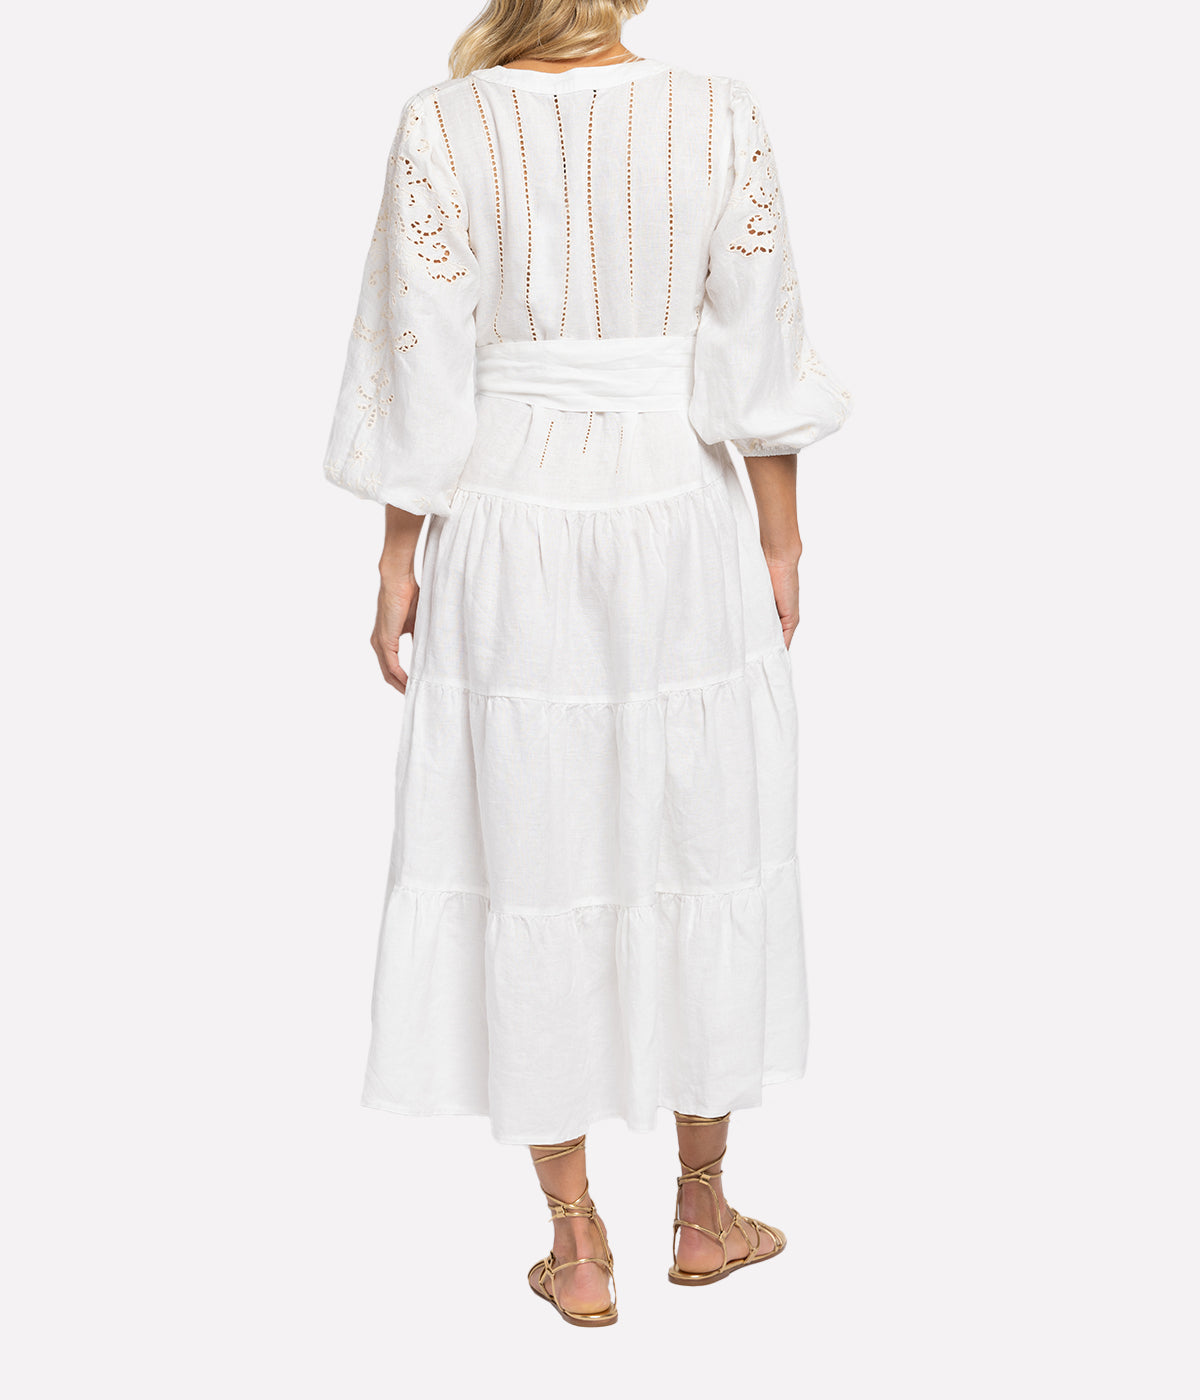 Ithica Long Dress in White & Cream